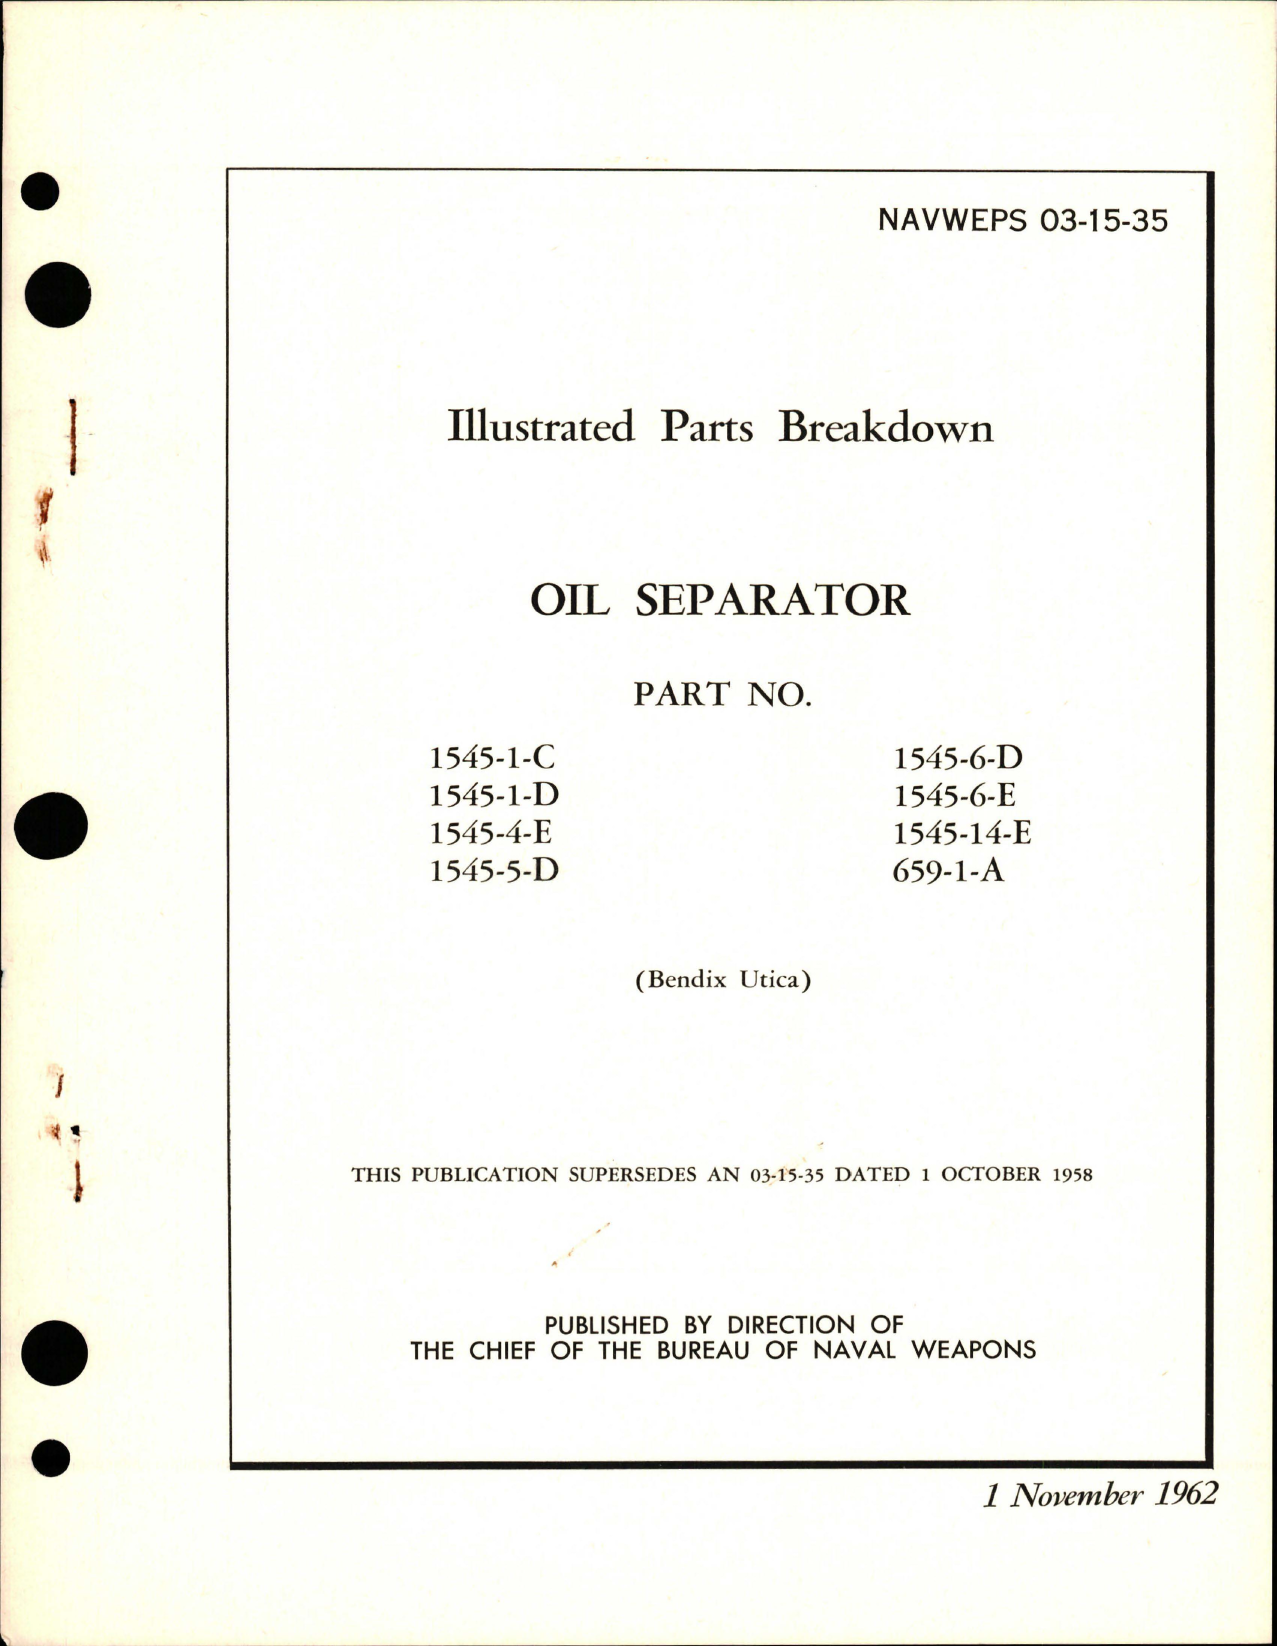 Sample page 1 from AirCorps Library document: Illustrated Parts Breakdown for Oil Separator - Parts 1545-1-C, 1545-1-D, 1545-4-E, 1545-5-D, 1545-6-D, 1545-6-E, 1545-14-E, 659-1-A